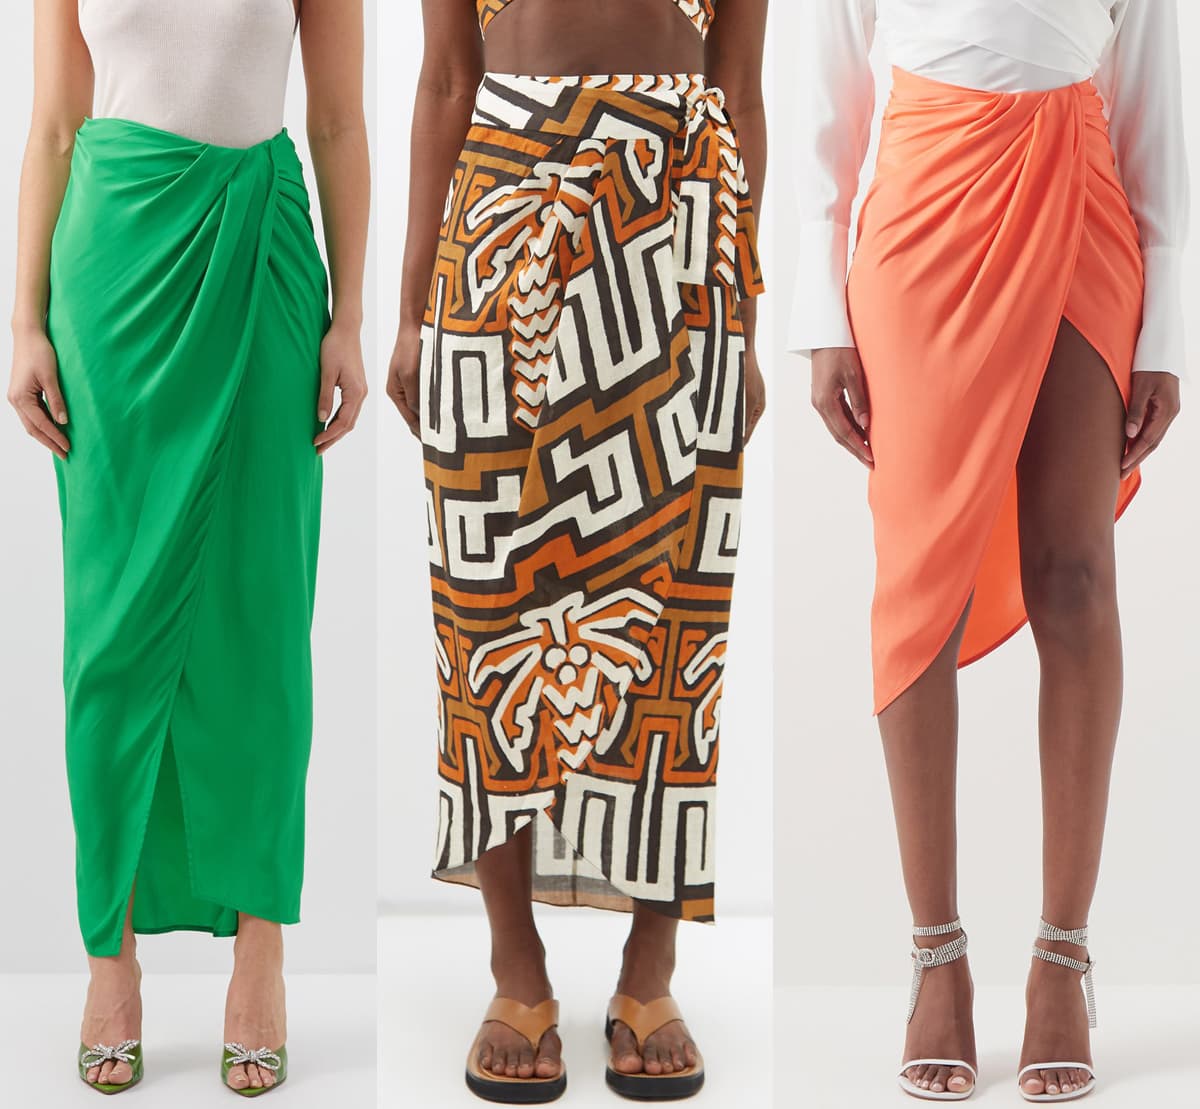 As its name suggests, wrap skirts allow you to wrap and tie the skirt around your waist